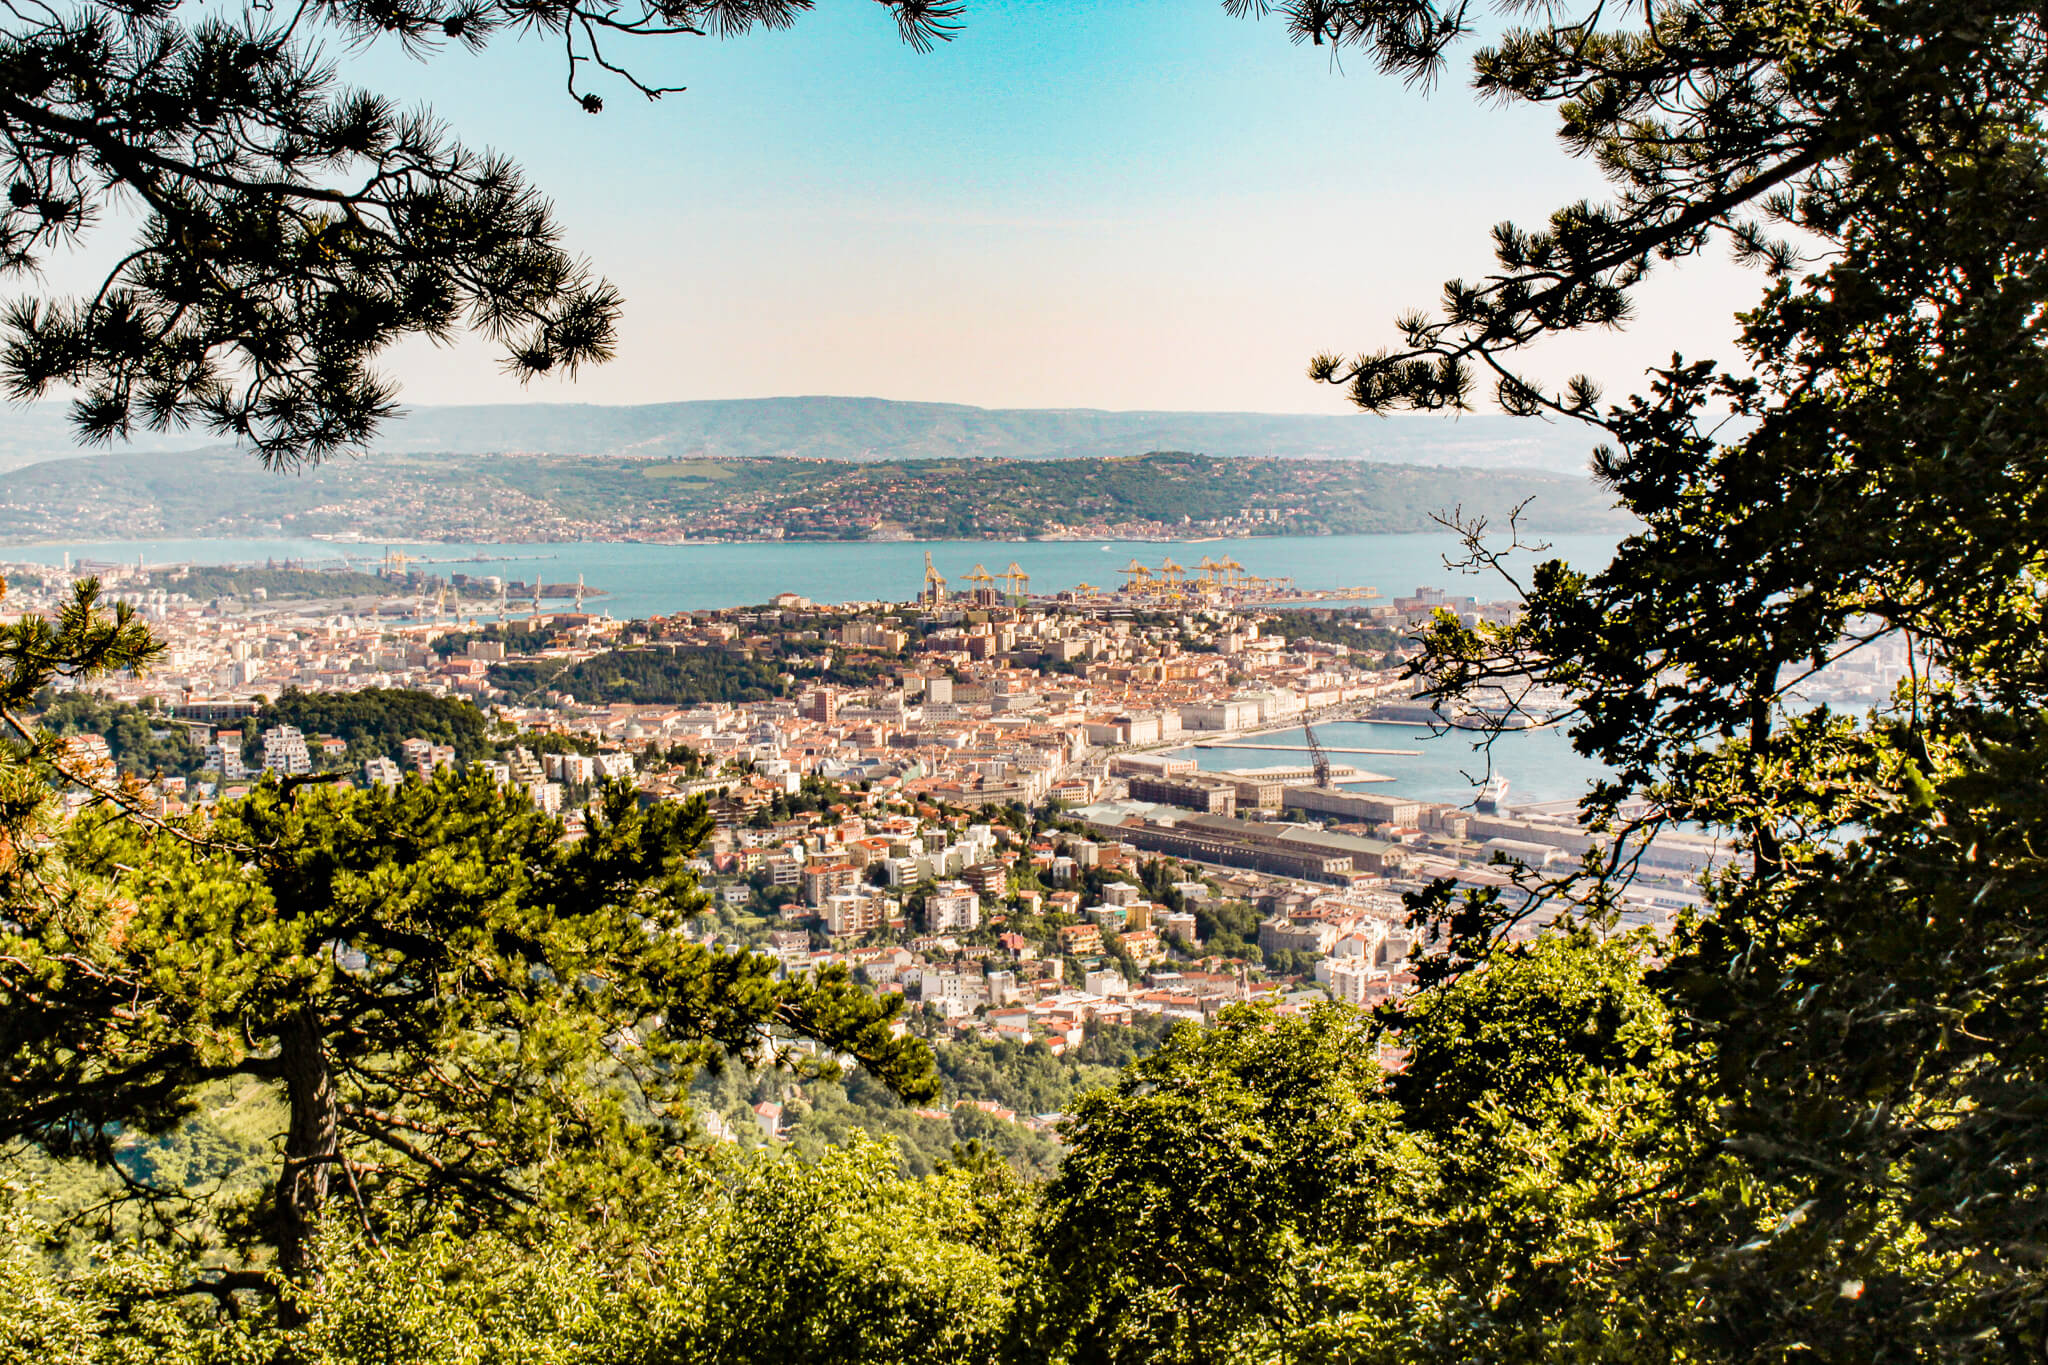 View of Trieste, Italy from Opicina